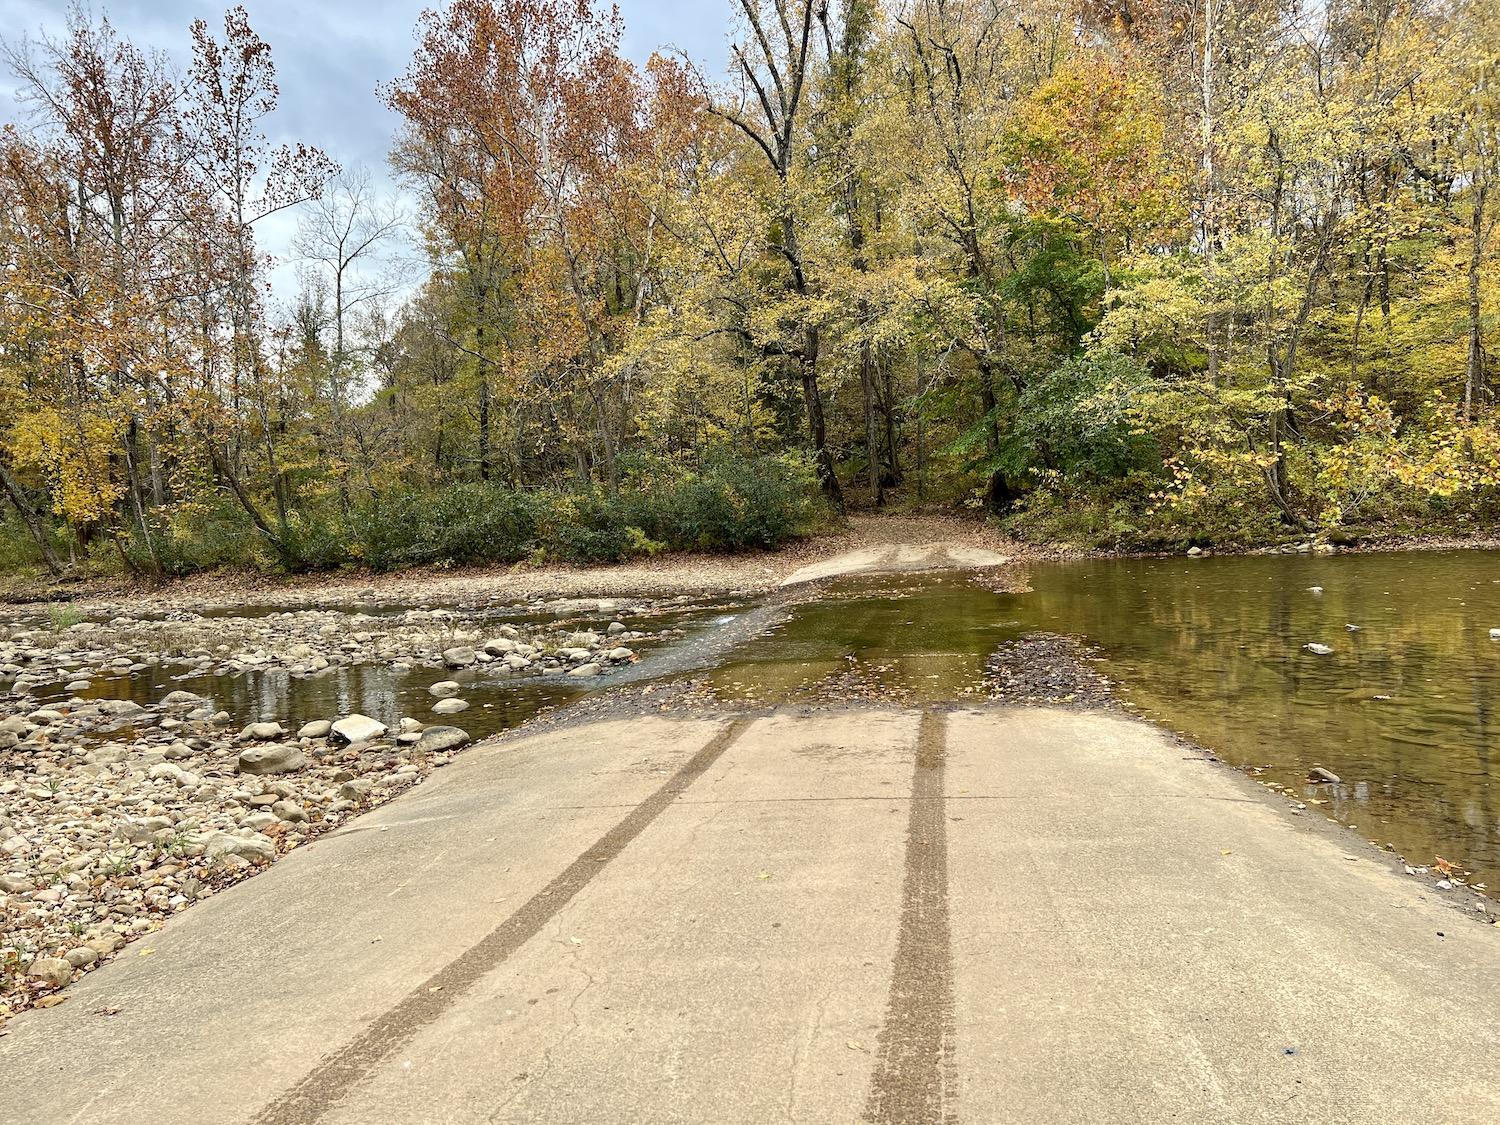 One of the river crossings in the upper district of the Buffalo National River.